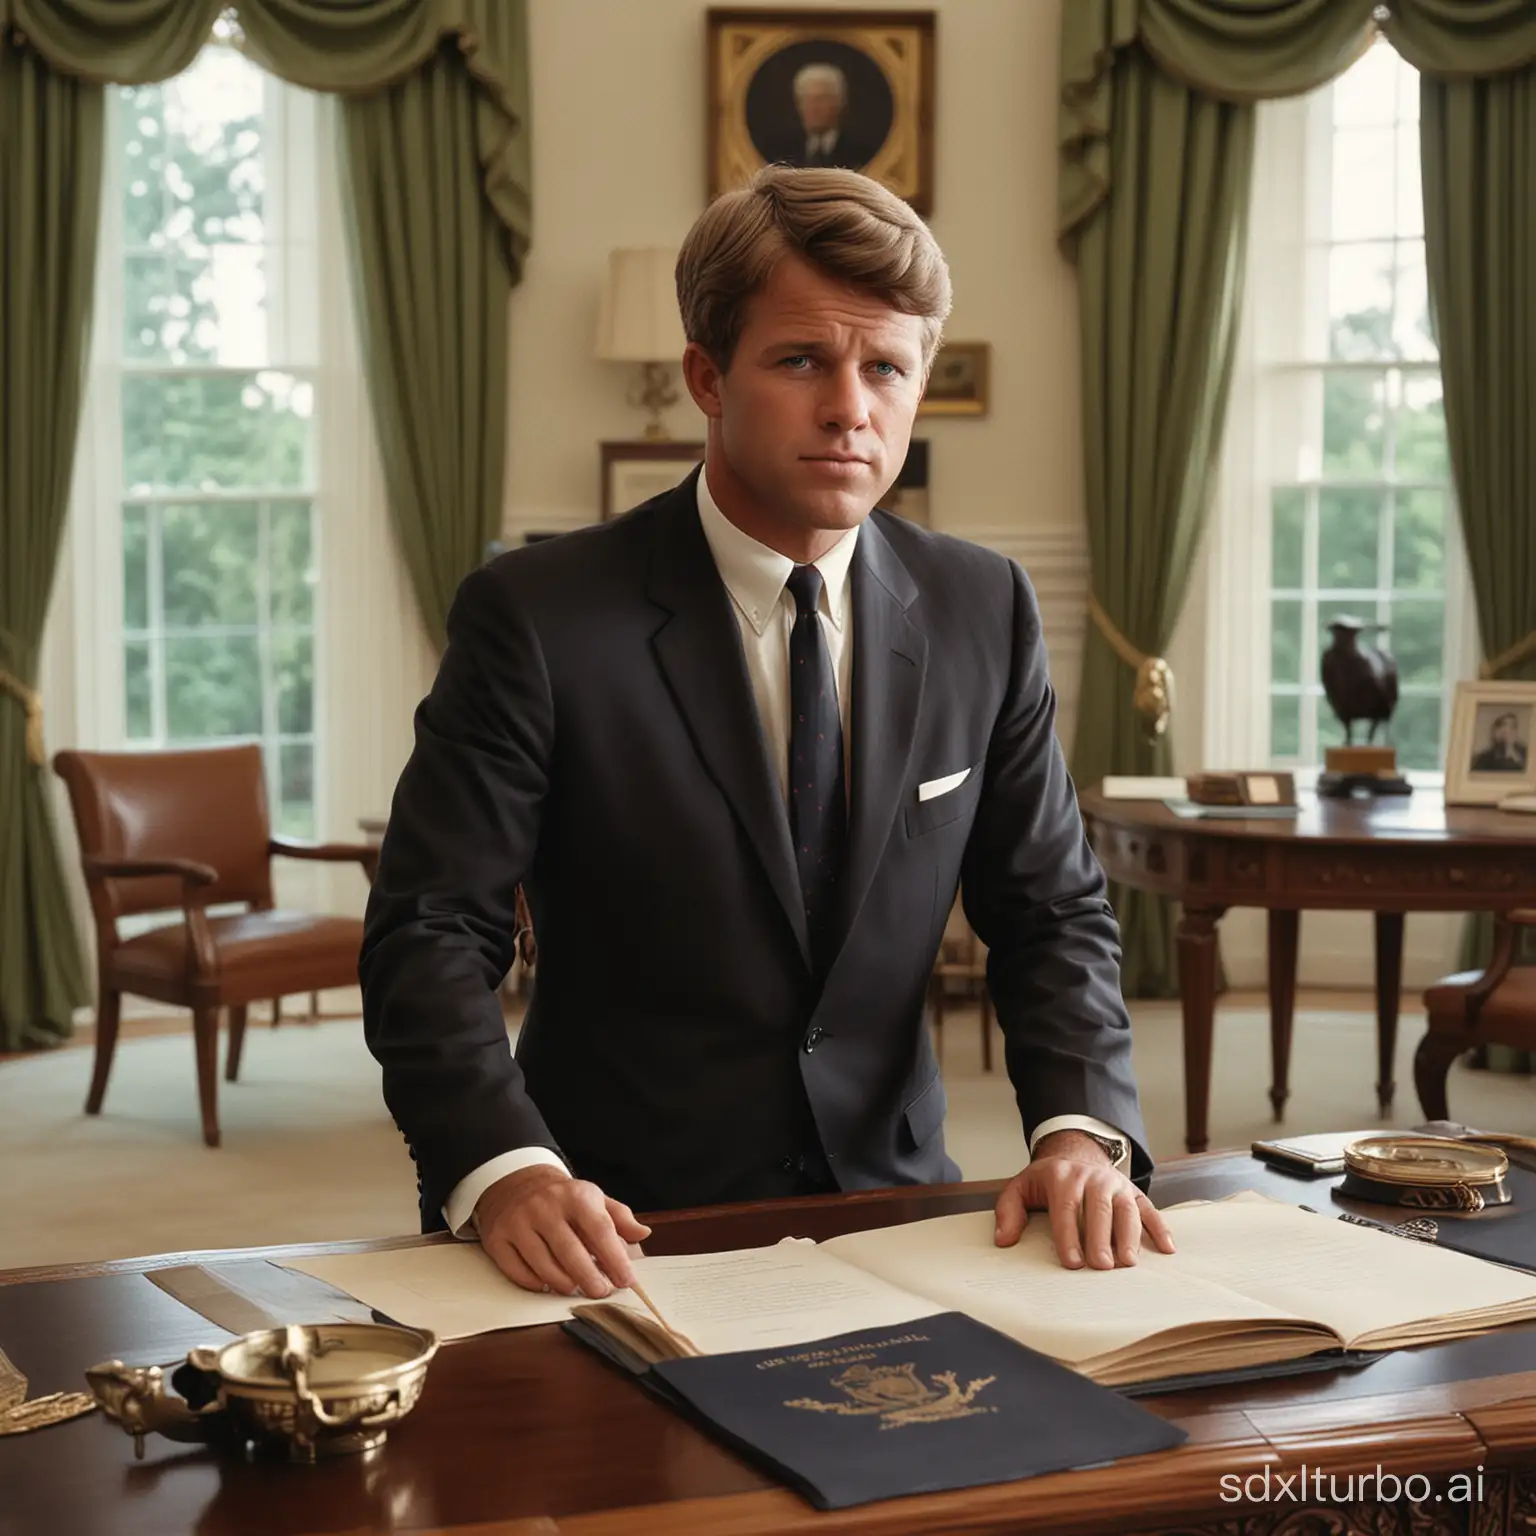 Robert F Kennedy Junior in a fine suit as president photo realistic rendering  is sitting in the Whitehouse  Oval office of the whitehouse.